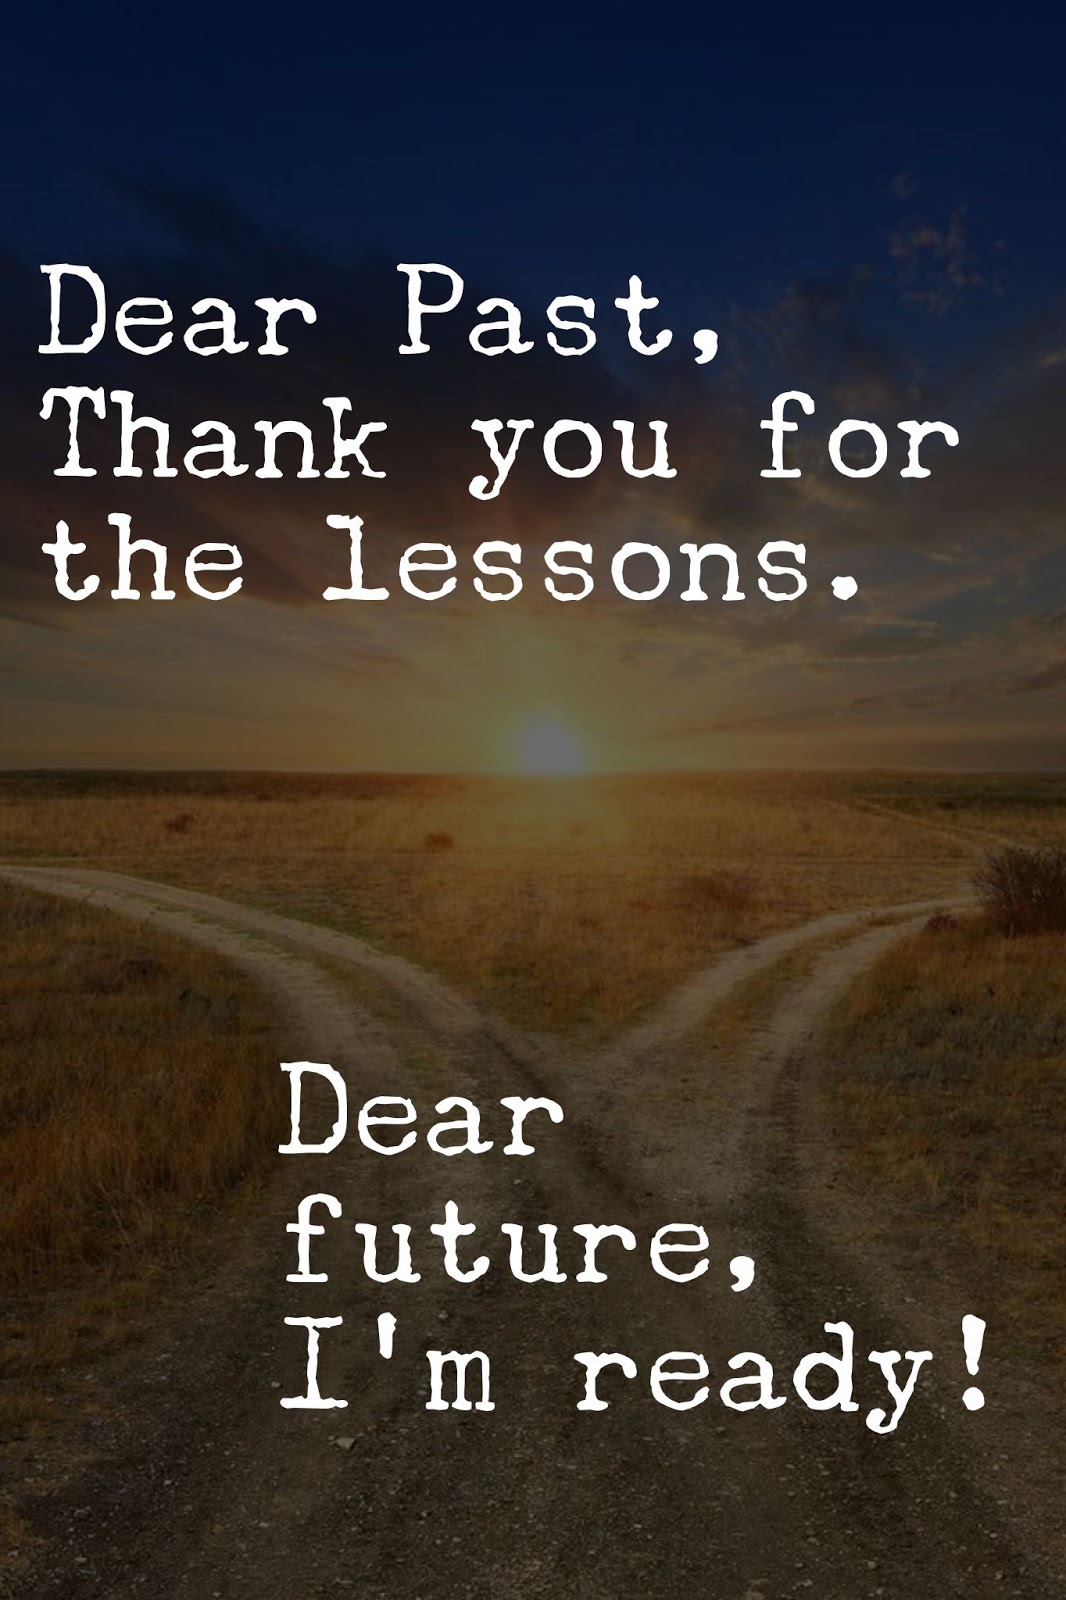 dear past, thank you for the lessons. dear future, i’m ready